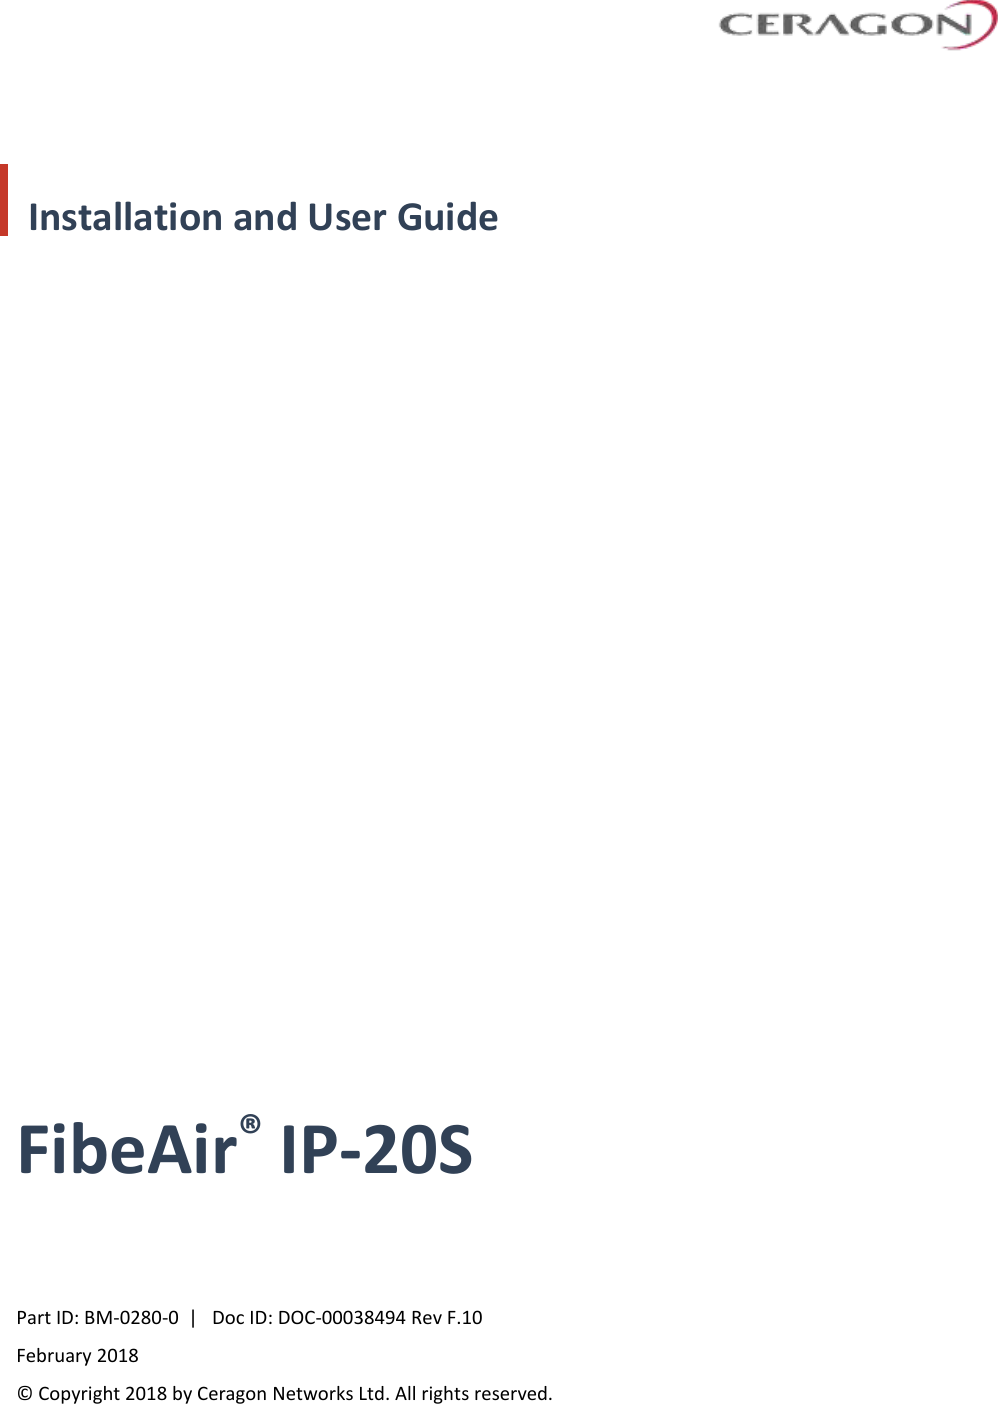         Installation and User Guide   FibeAir® IP-20S      Part ID: BM-0280-0  |   Doc ID: DOC-00038494 Rev F.10 February 2018  © Copyright 2018 by Ceragon Networks Ltd. All rights reserved. 